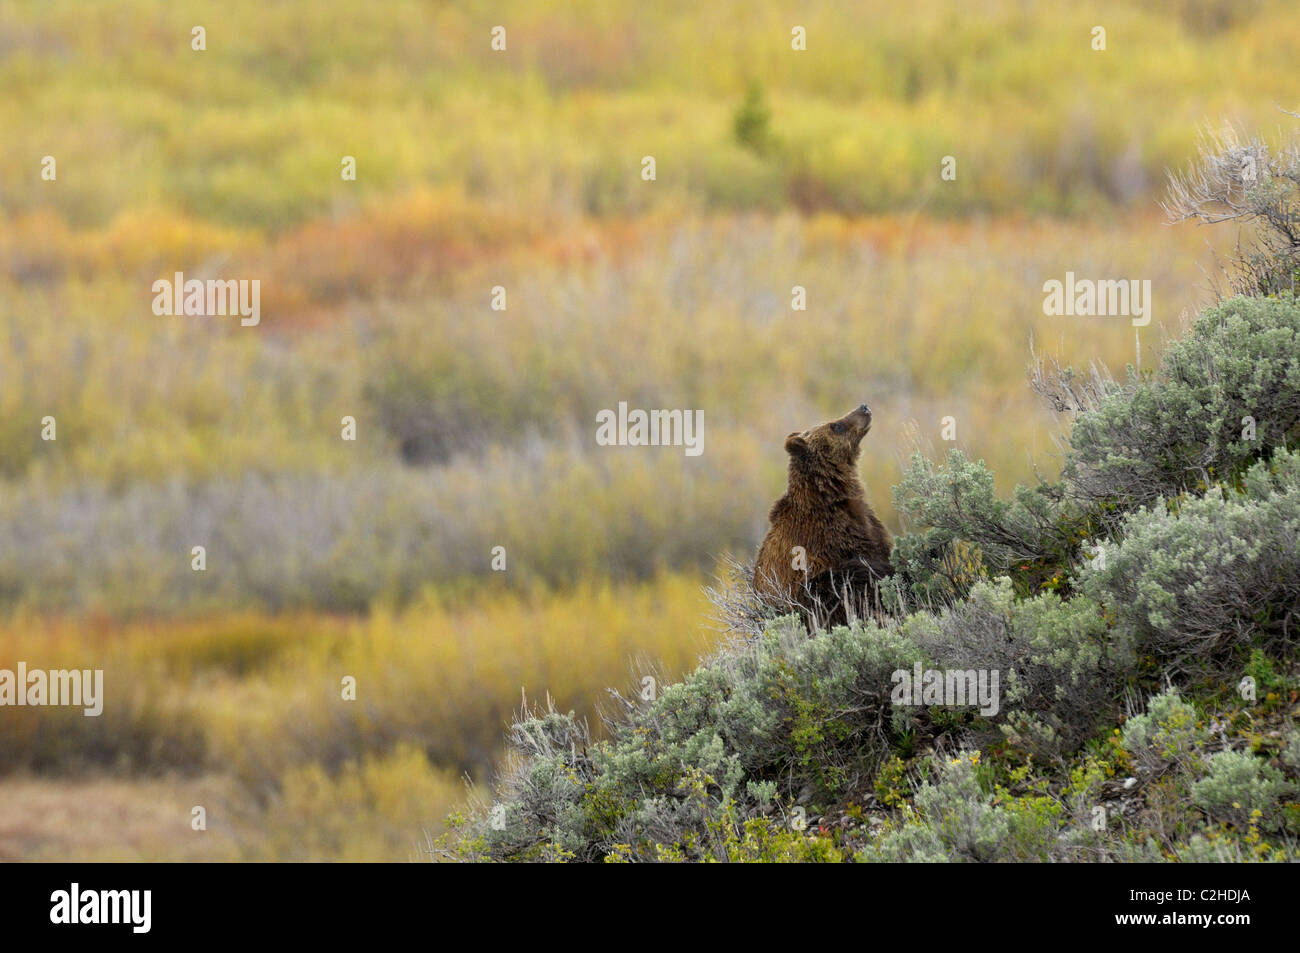 Grizzly Bear in a beautiful sunrise scenel Stock Photo